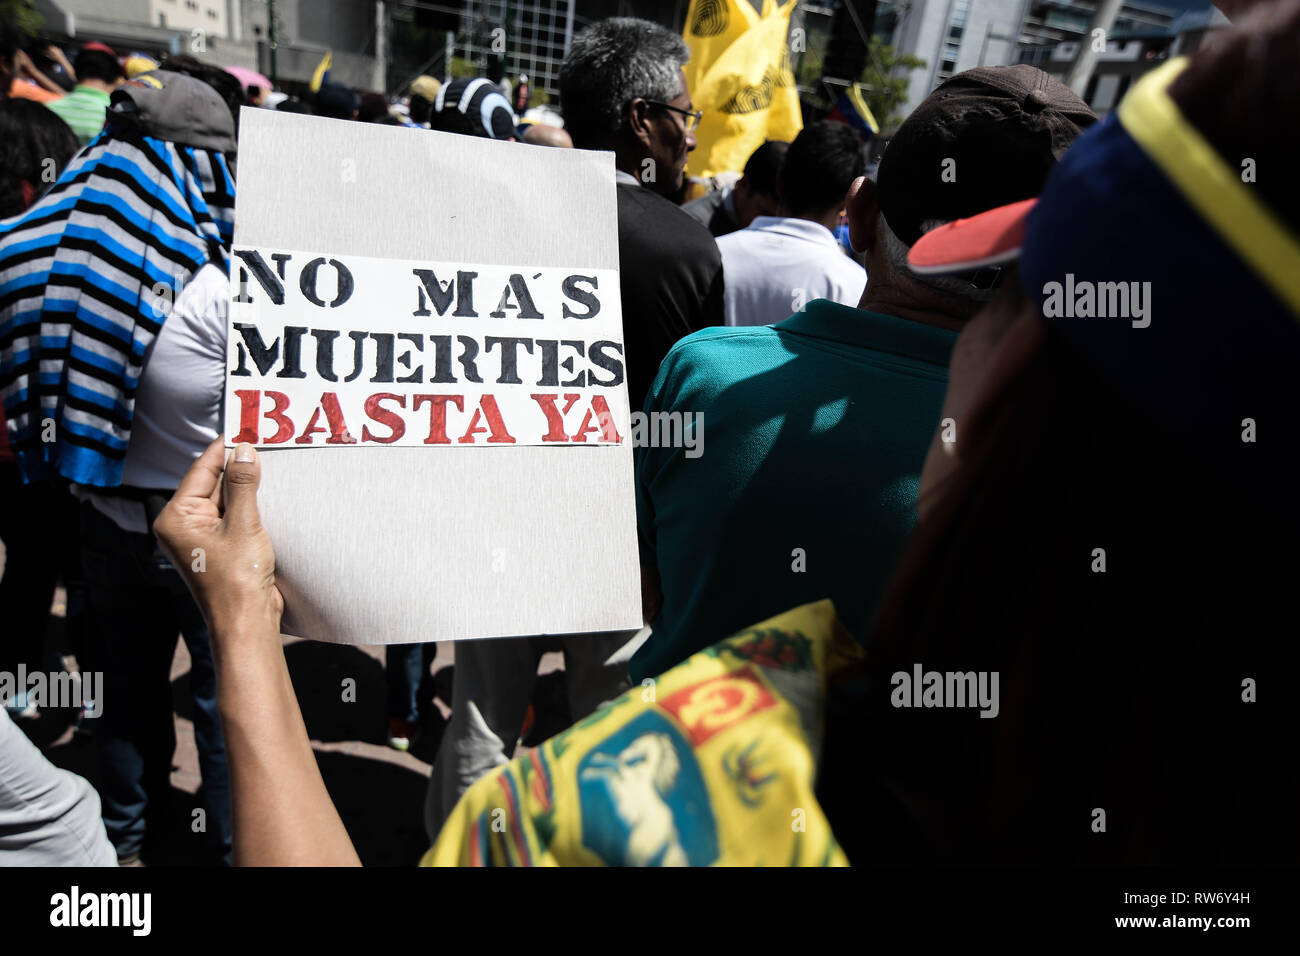 A woman seen holding a placard during a rally in support of Juan Guaido. Juan Guaido, the Venezuelan opposition leader, where many nations have recognized as the legitimate interim president of Venezuela, greets his supporters during a rally against the government of President Nicolas Maduro in Caracas. Stock Photo